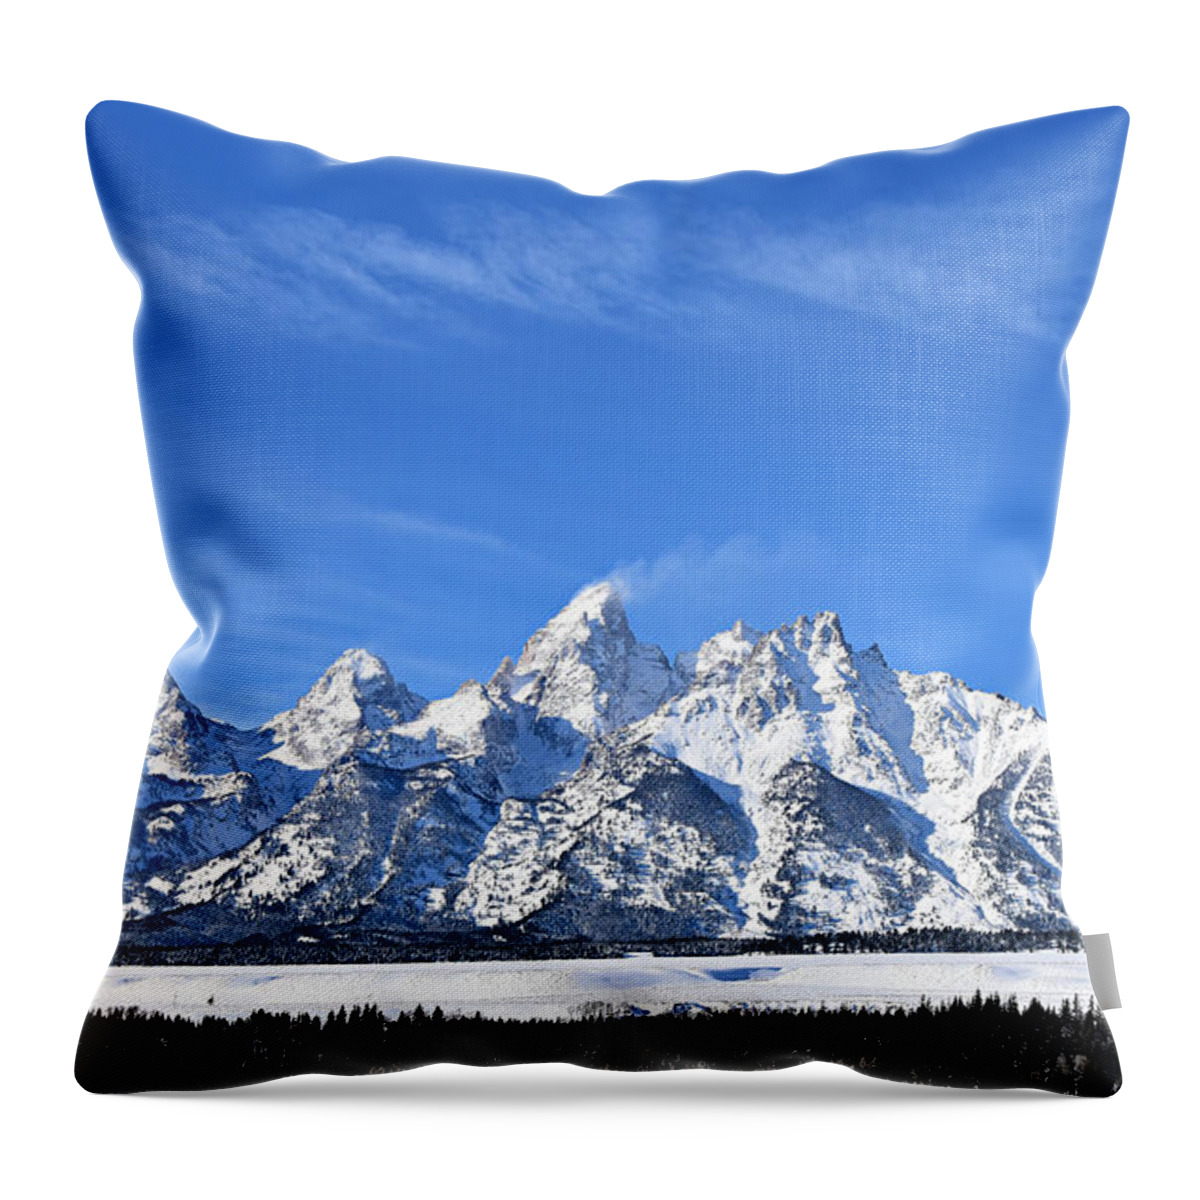 Tetons Throw Pillow featuring the photograph Tetons in Winter #4 by Dorrene BrownButterfield